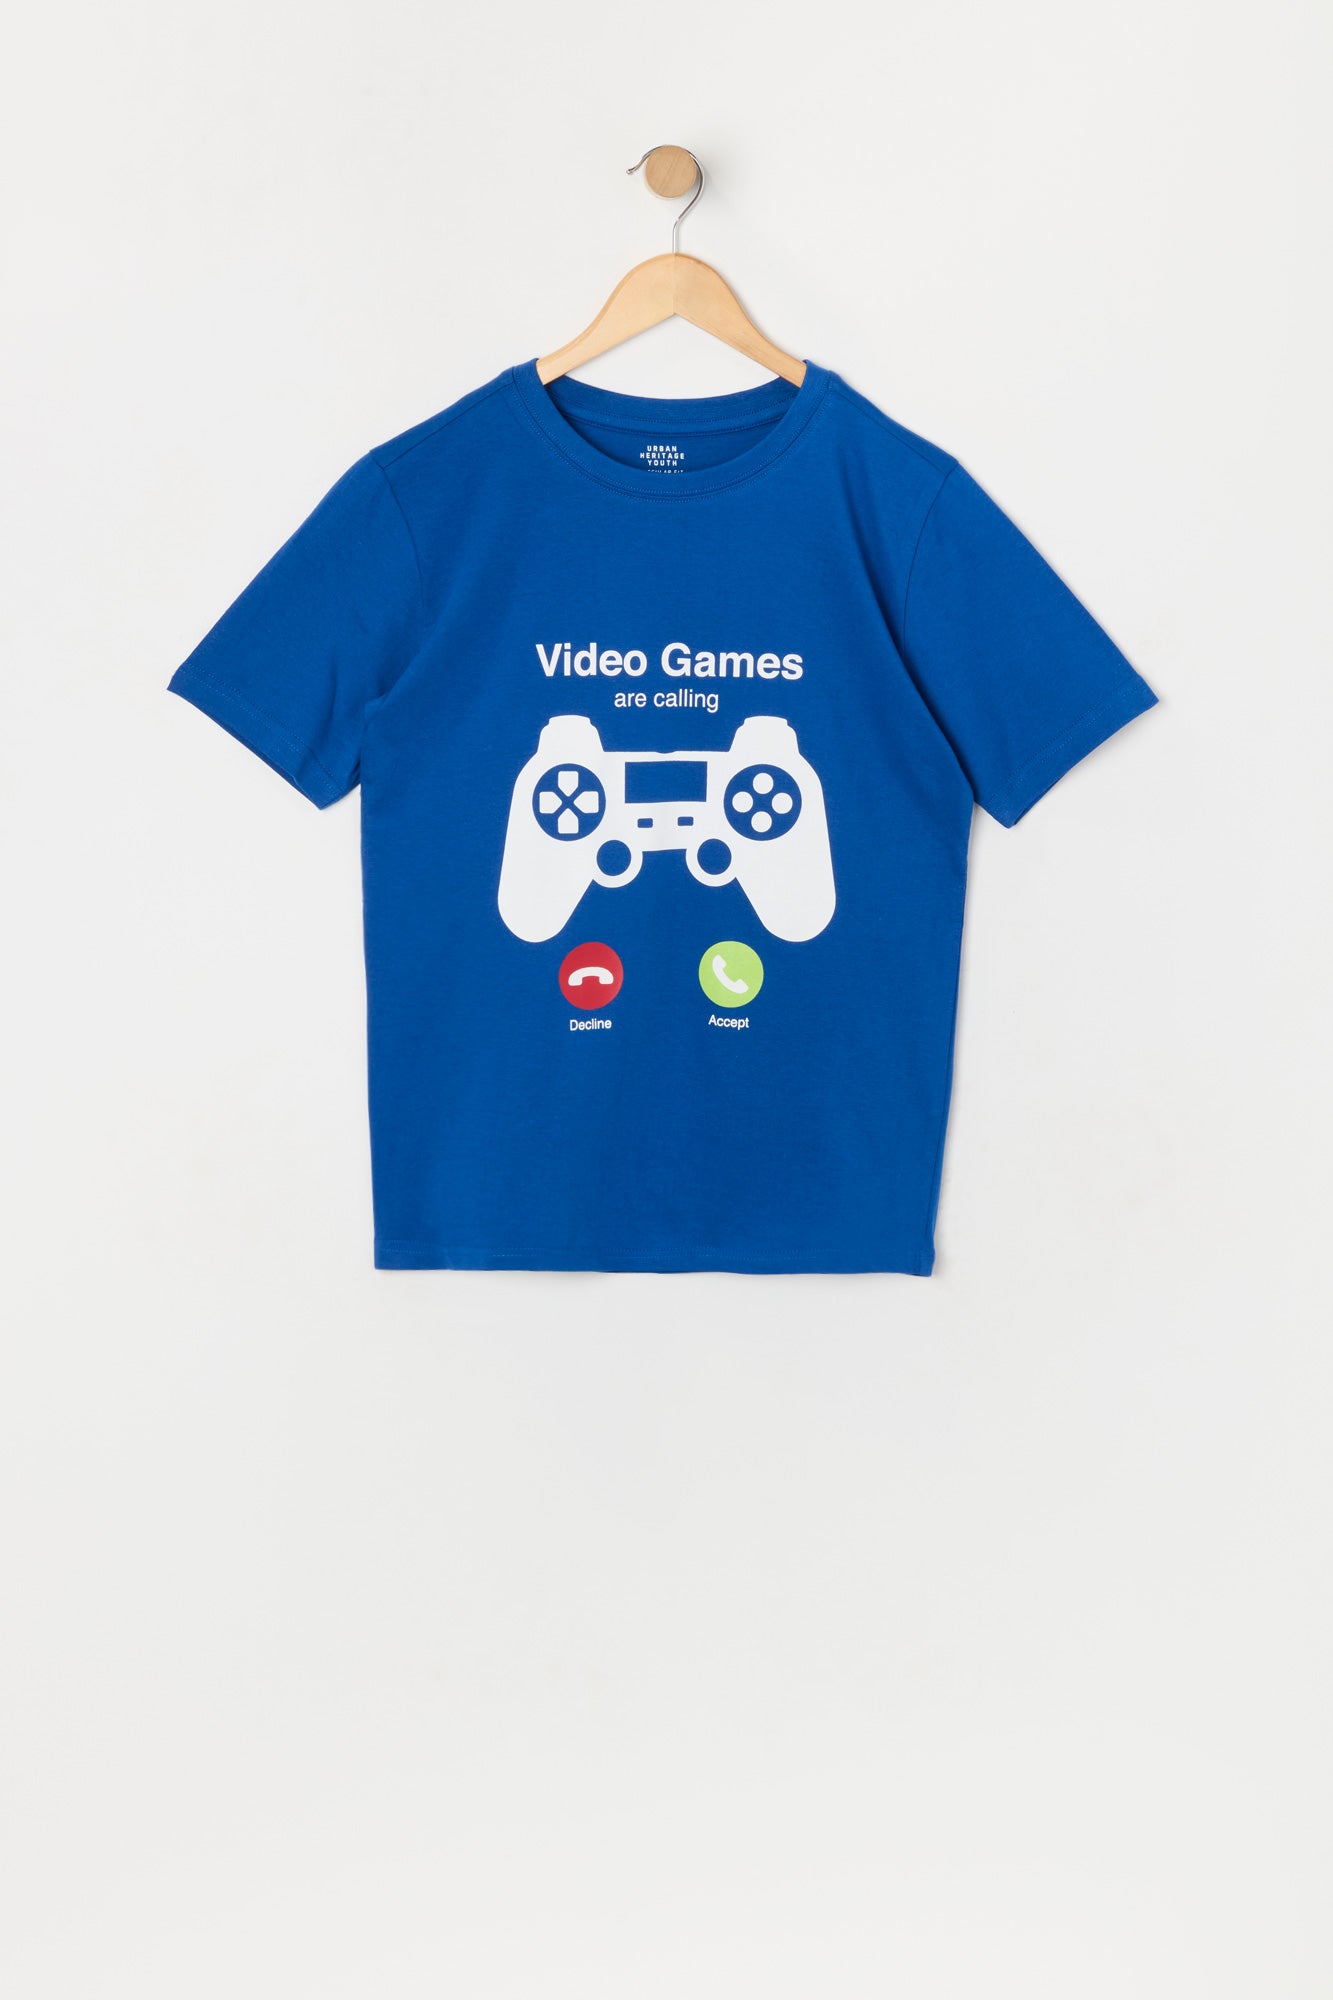 Boys Video Games are Calling Graphic T-Shirt